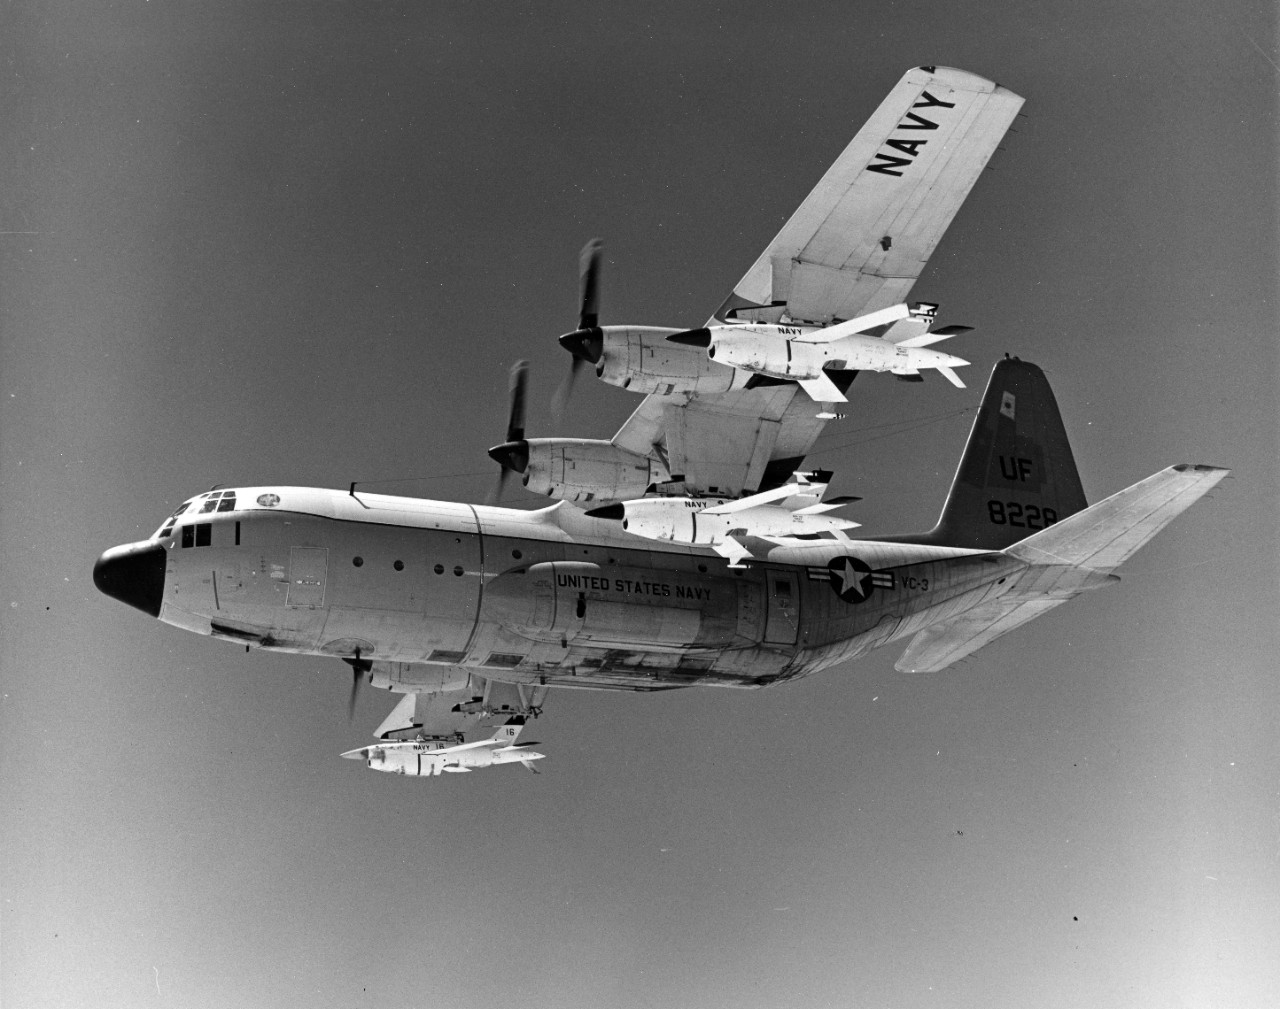 Point Mugu, CA - a Fleet Composite Squadron 3 (VC-3) DC-130A Hercules Cargo Transport aircraft in flight over the target range. The aircraft is armed with three BQM-34 Firebee target drones. August 1975. 